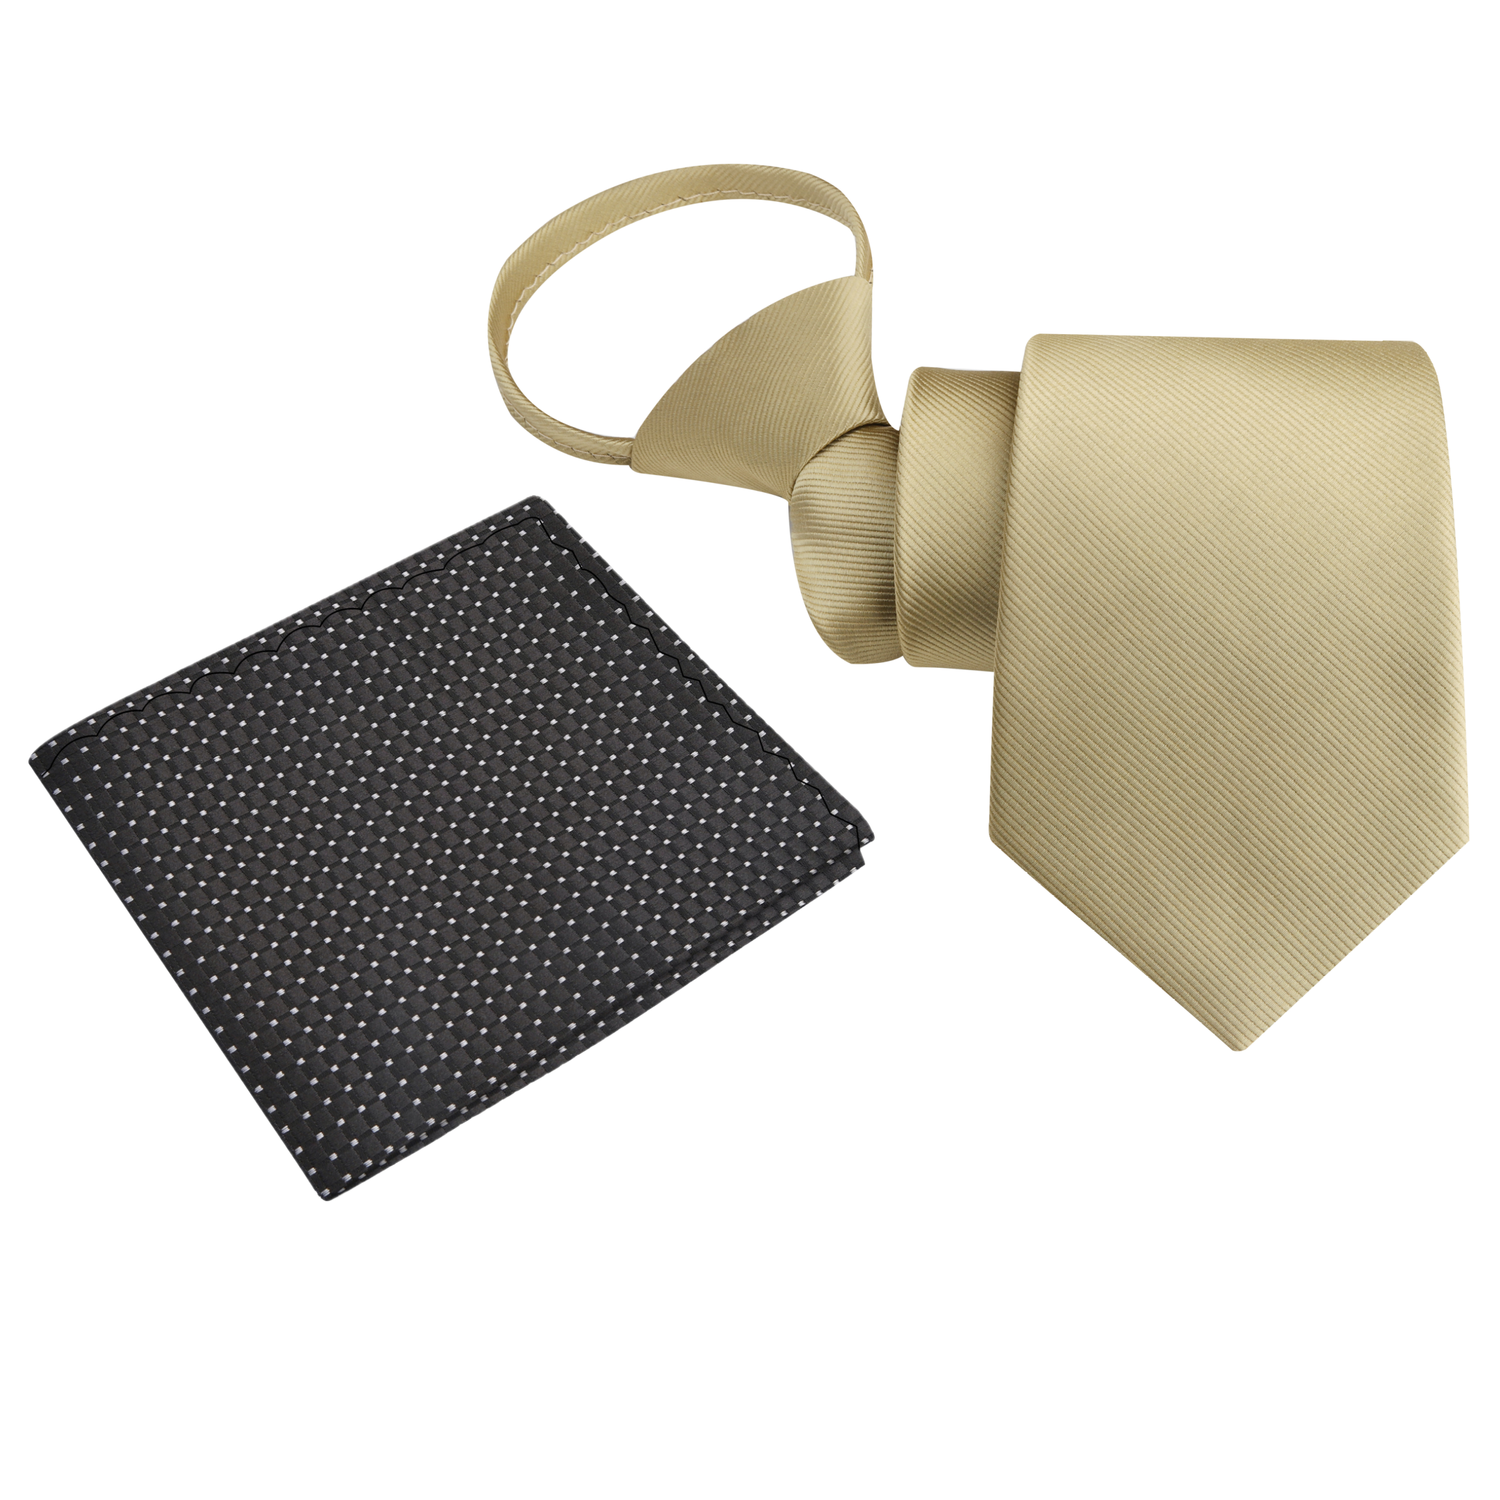 Zipper: Solid Pale Gold Tie and Black Geometric Square